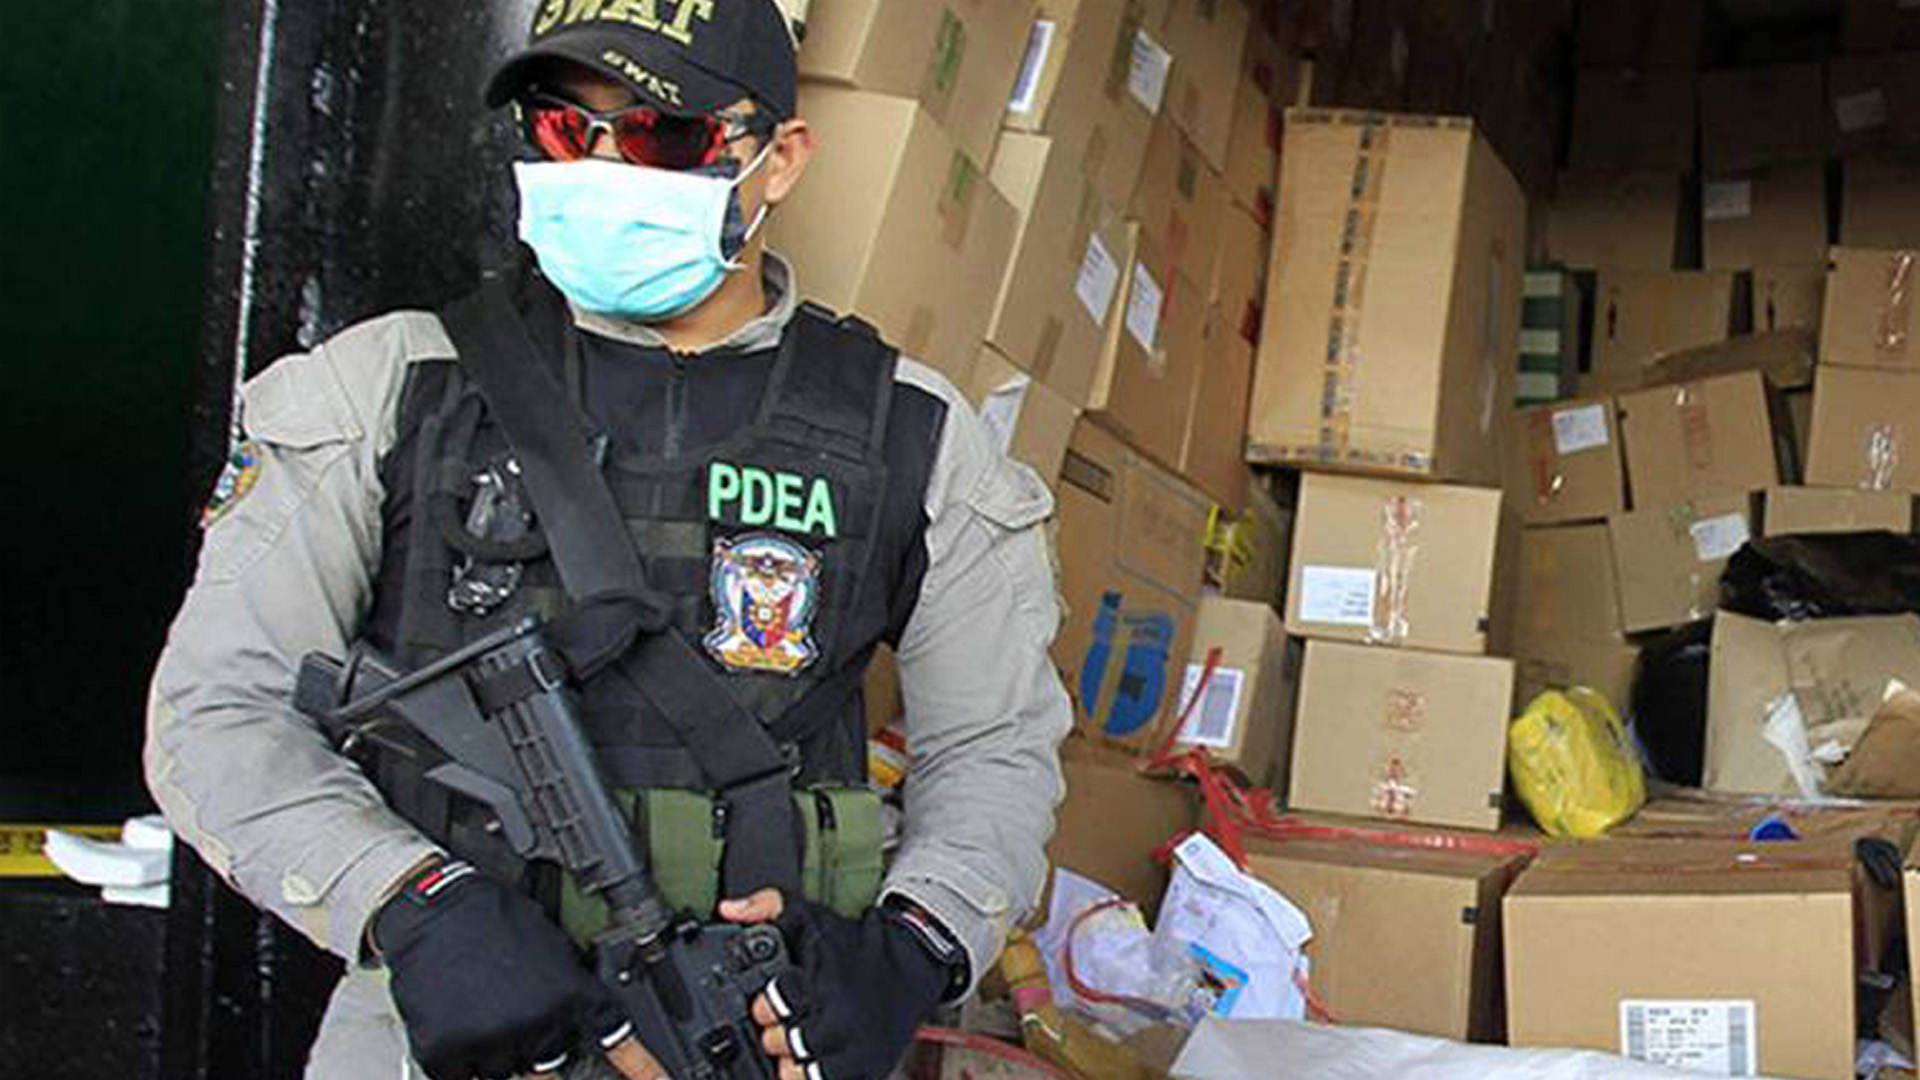 PDEA is looking for Drug Enforcement Officers nationwide